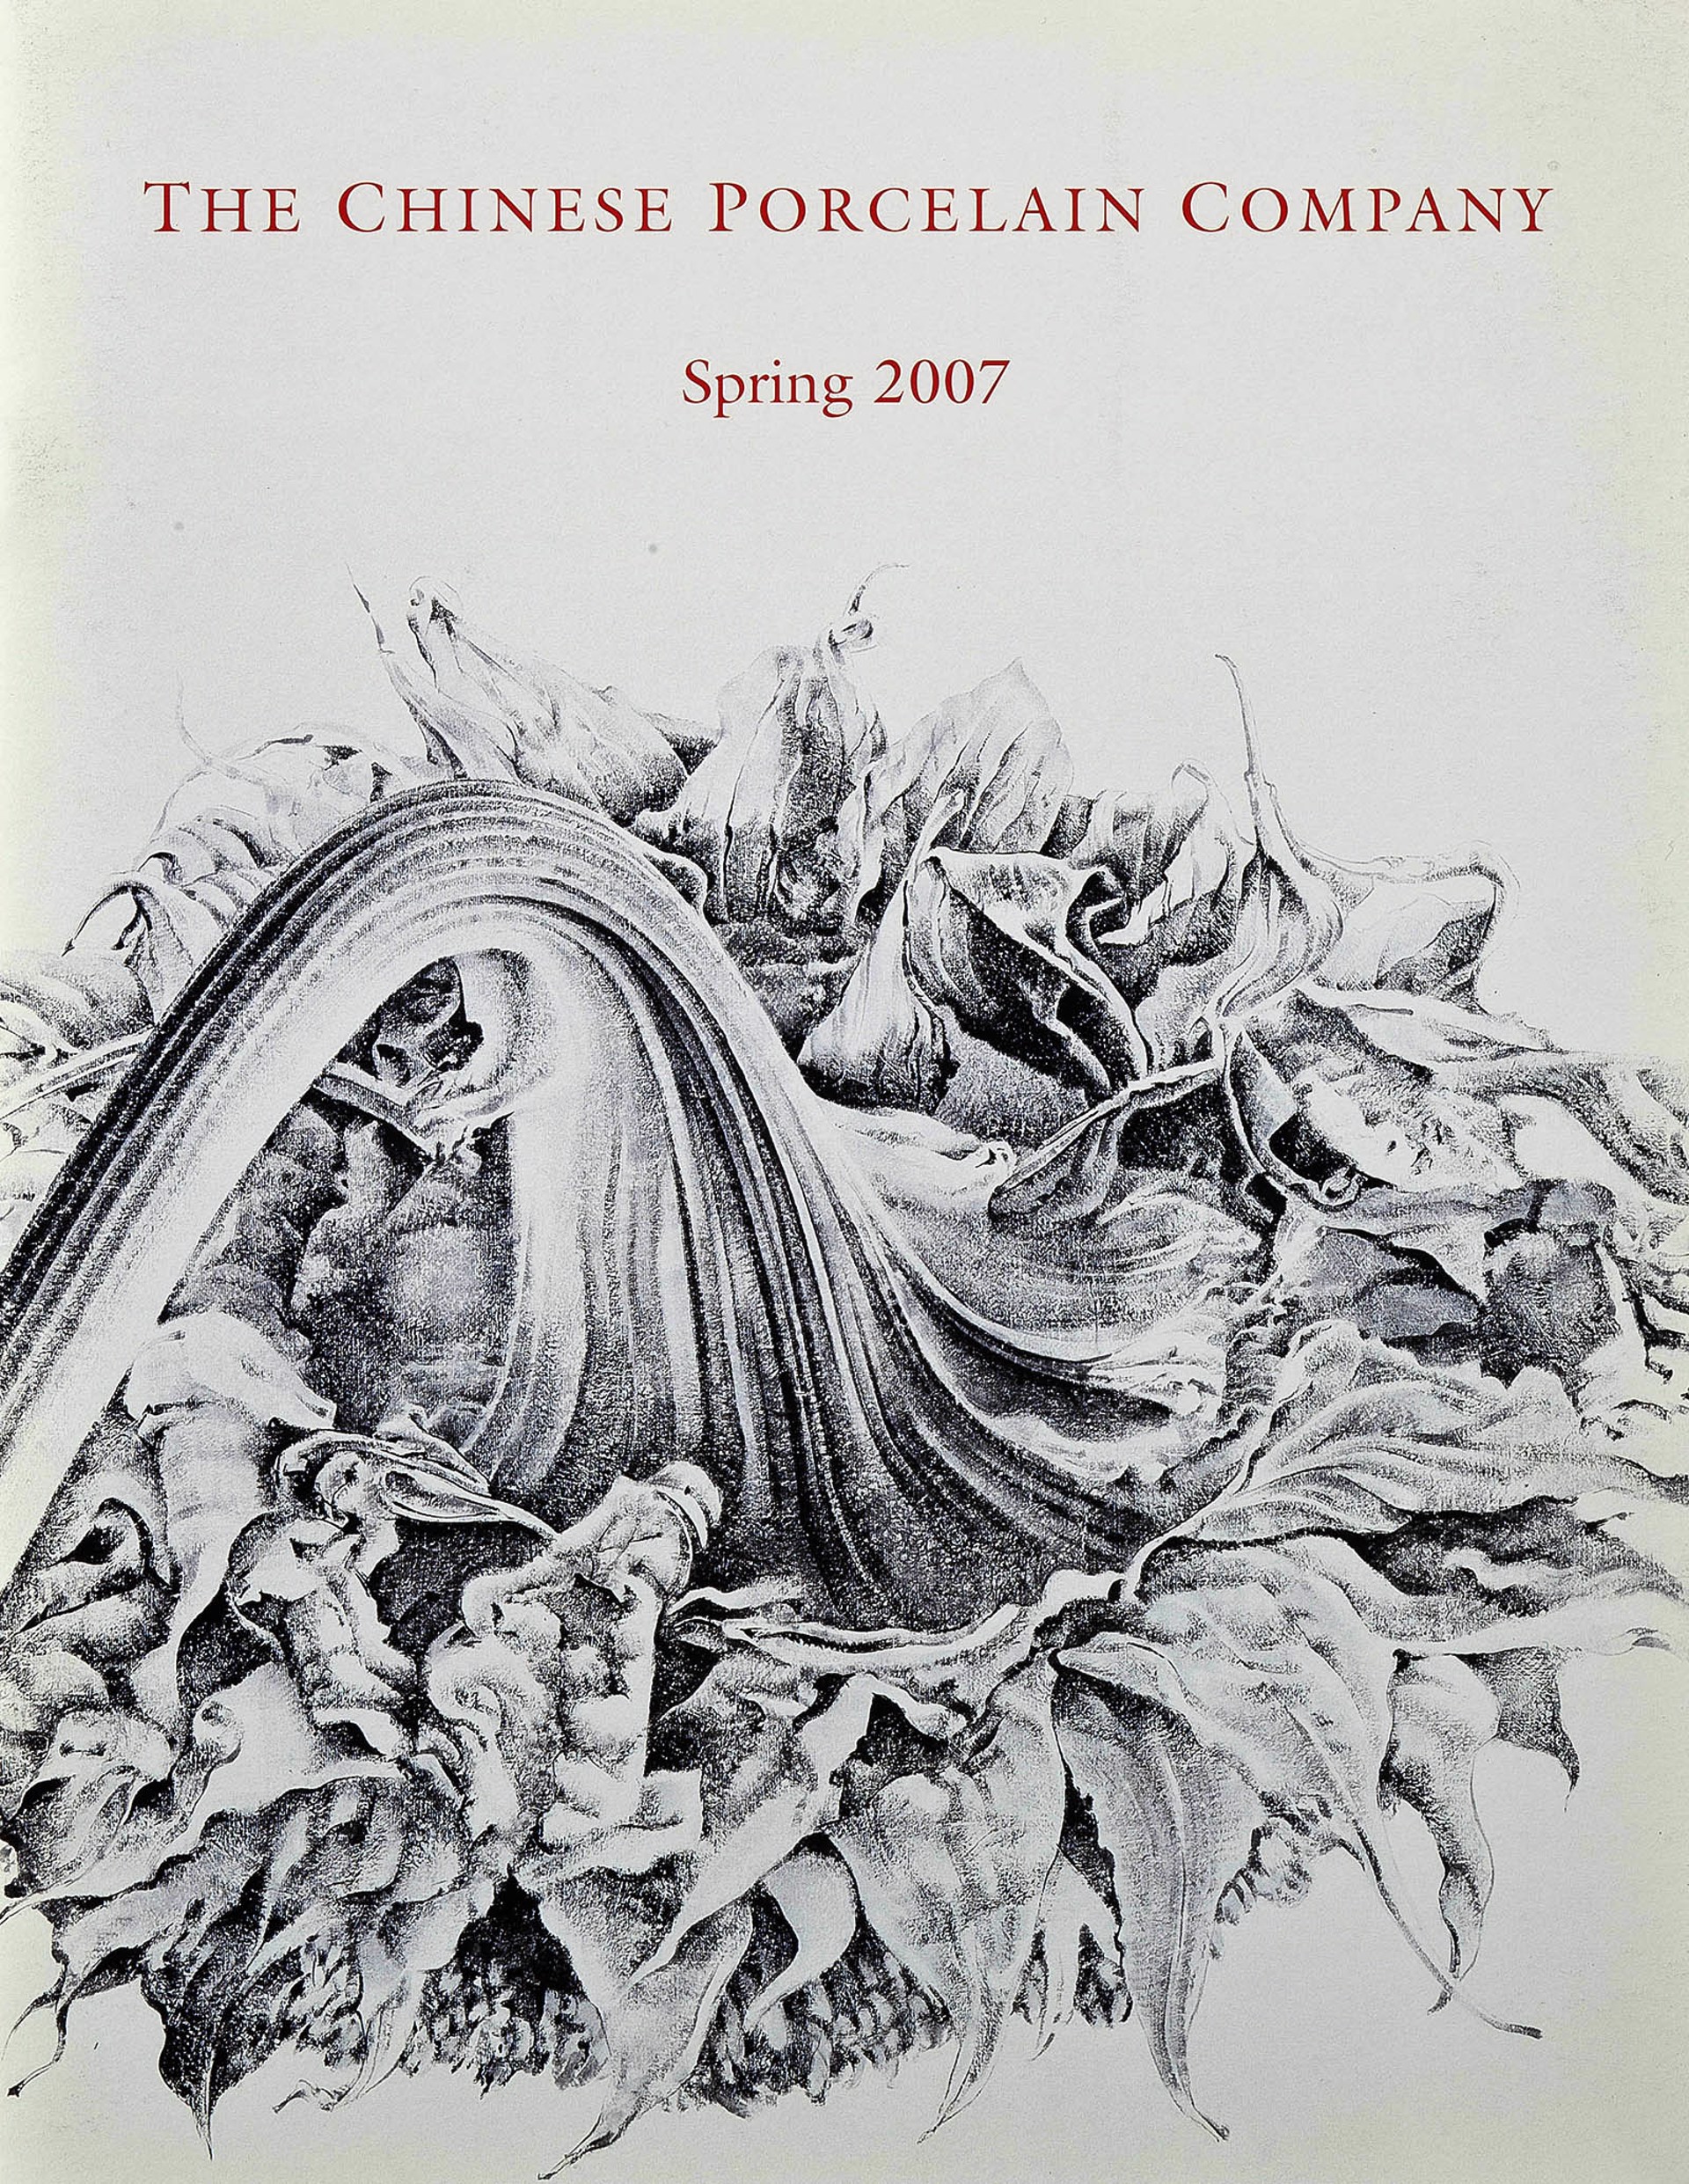 Spring 2007 (out of print) by Brochure 10